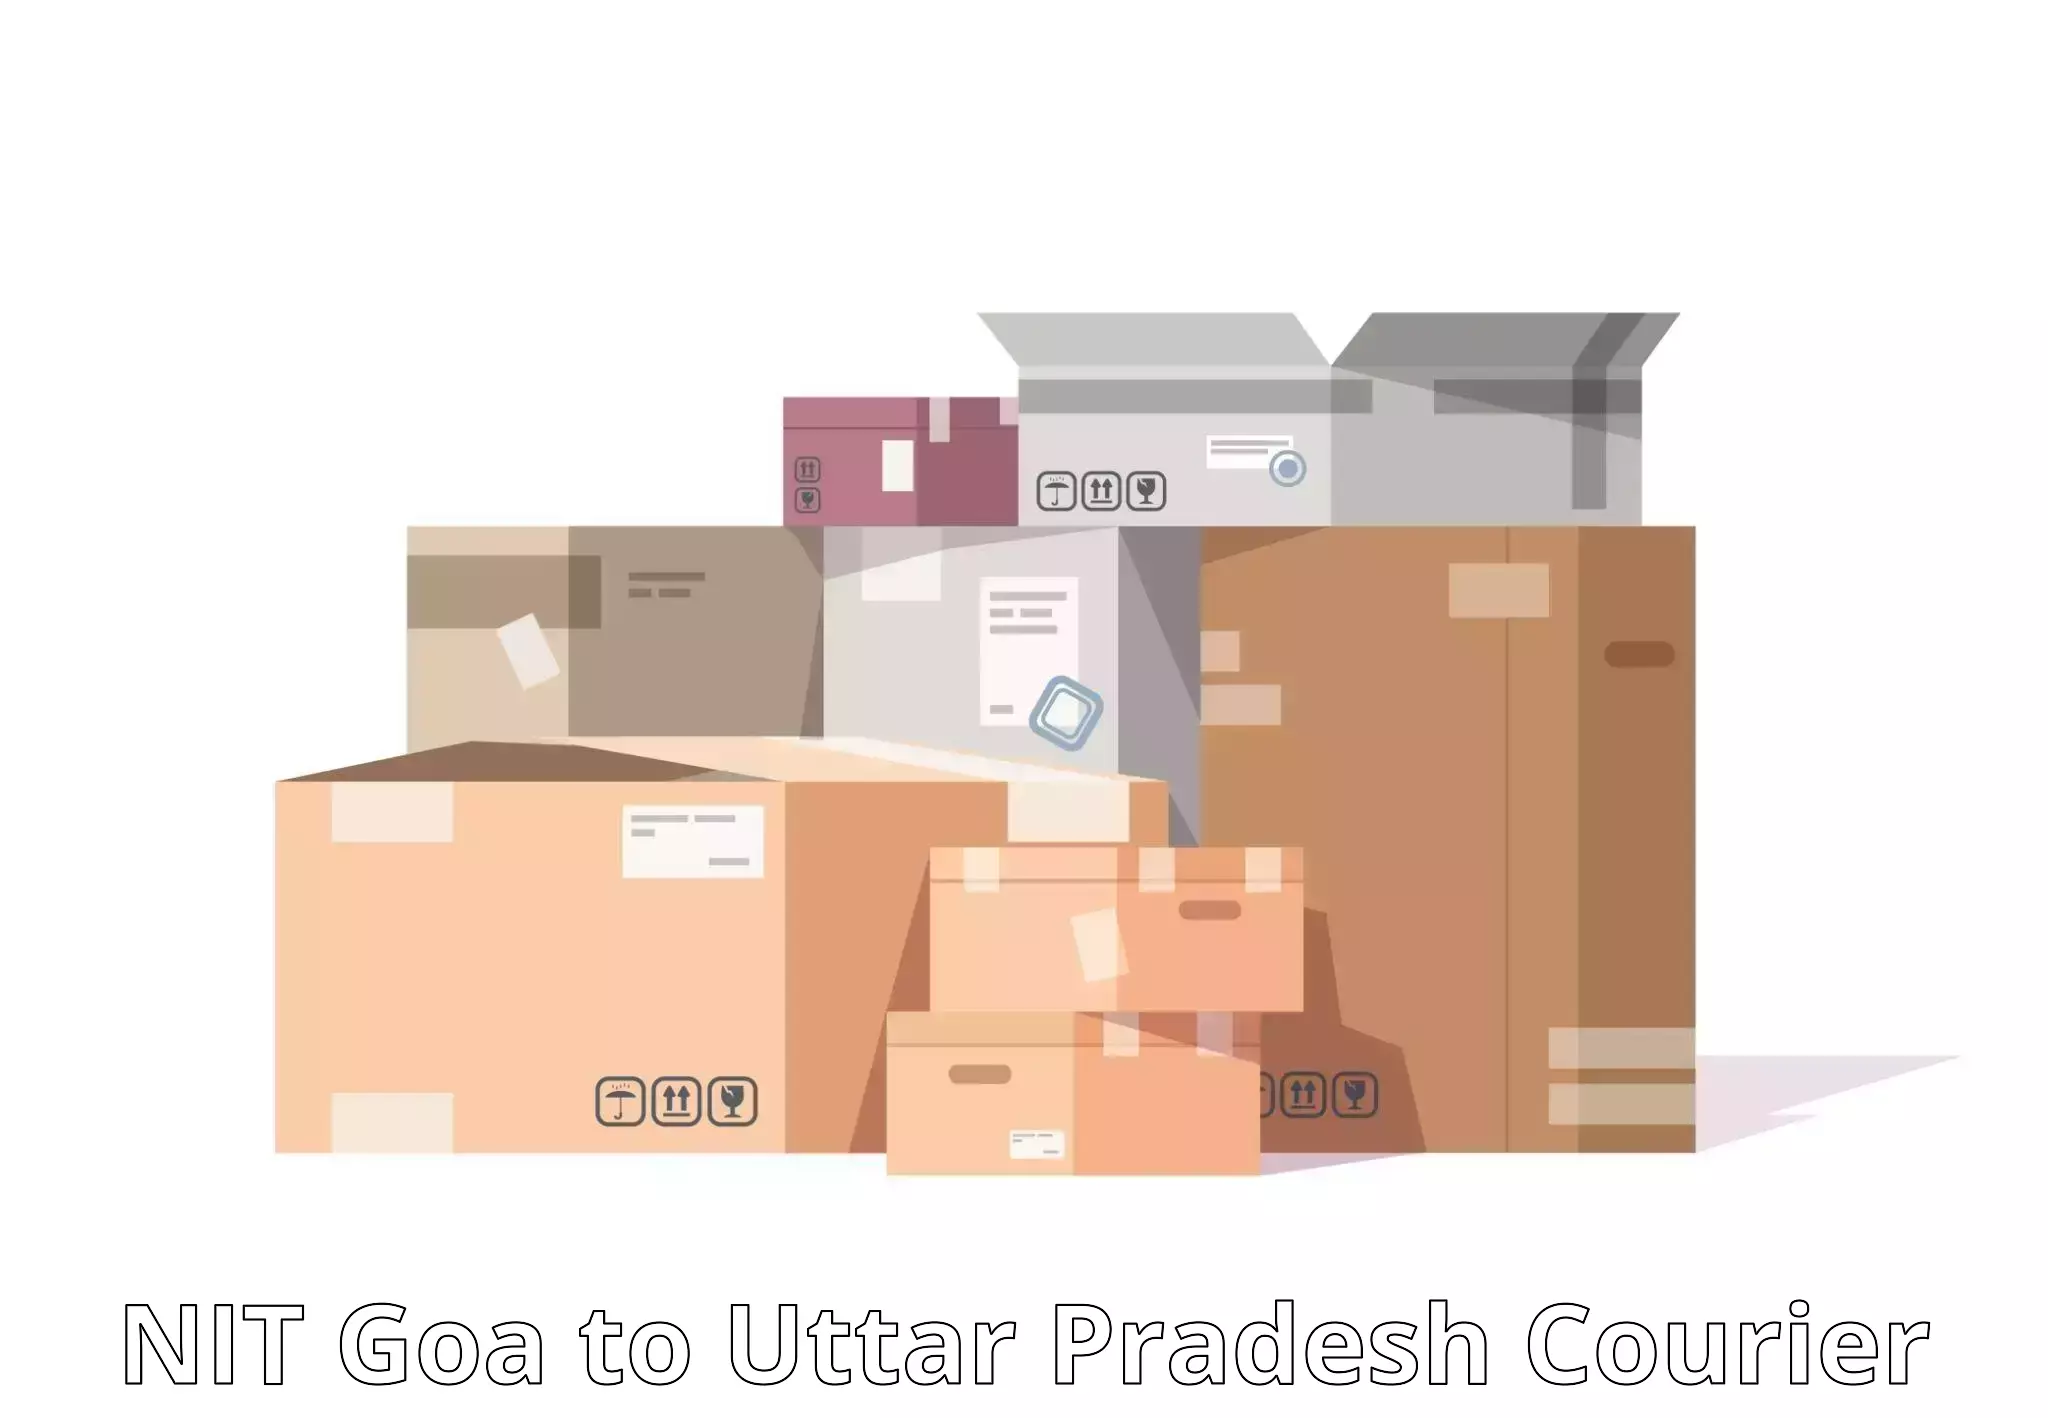 Large package courier NIT Goa to Aunrihar